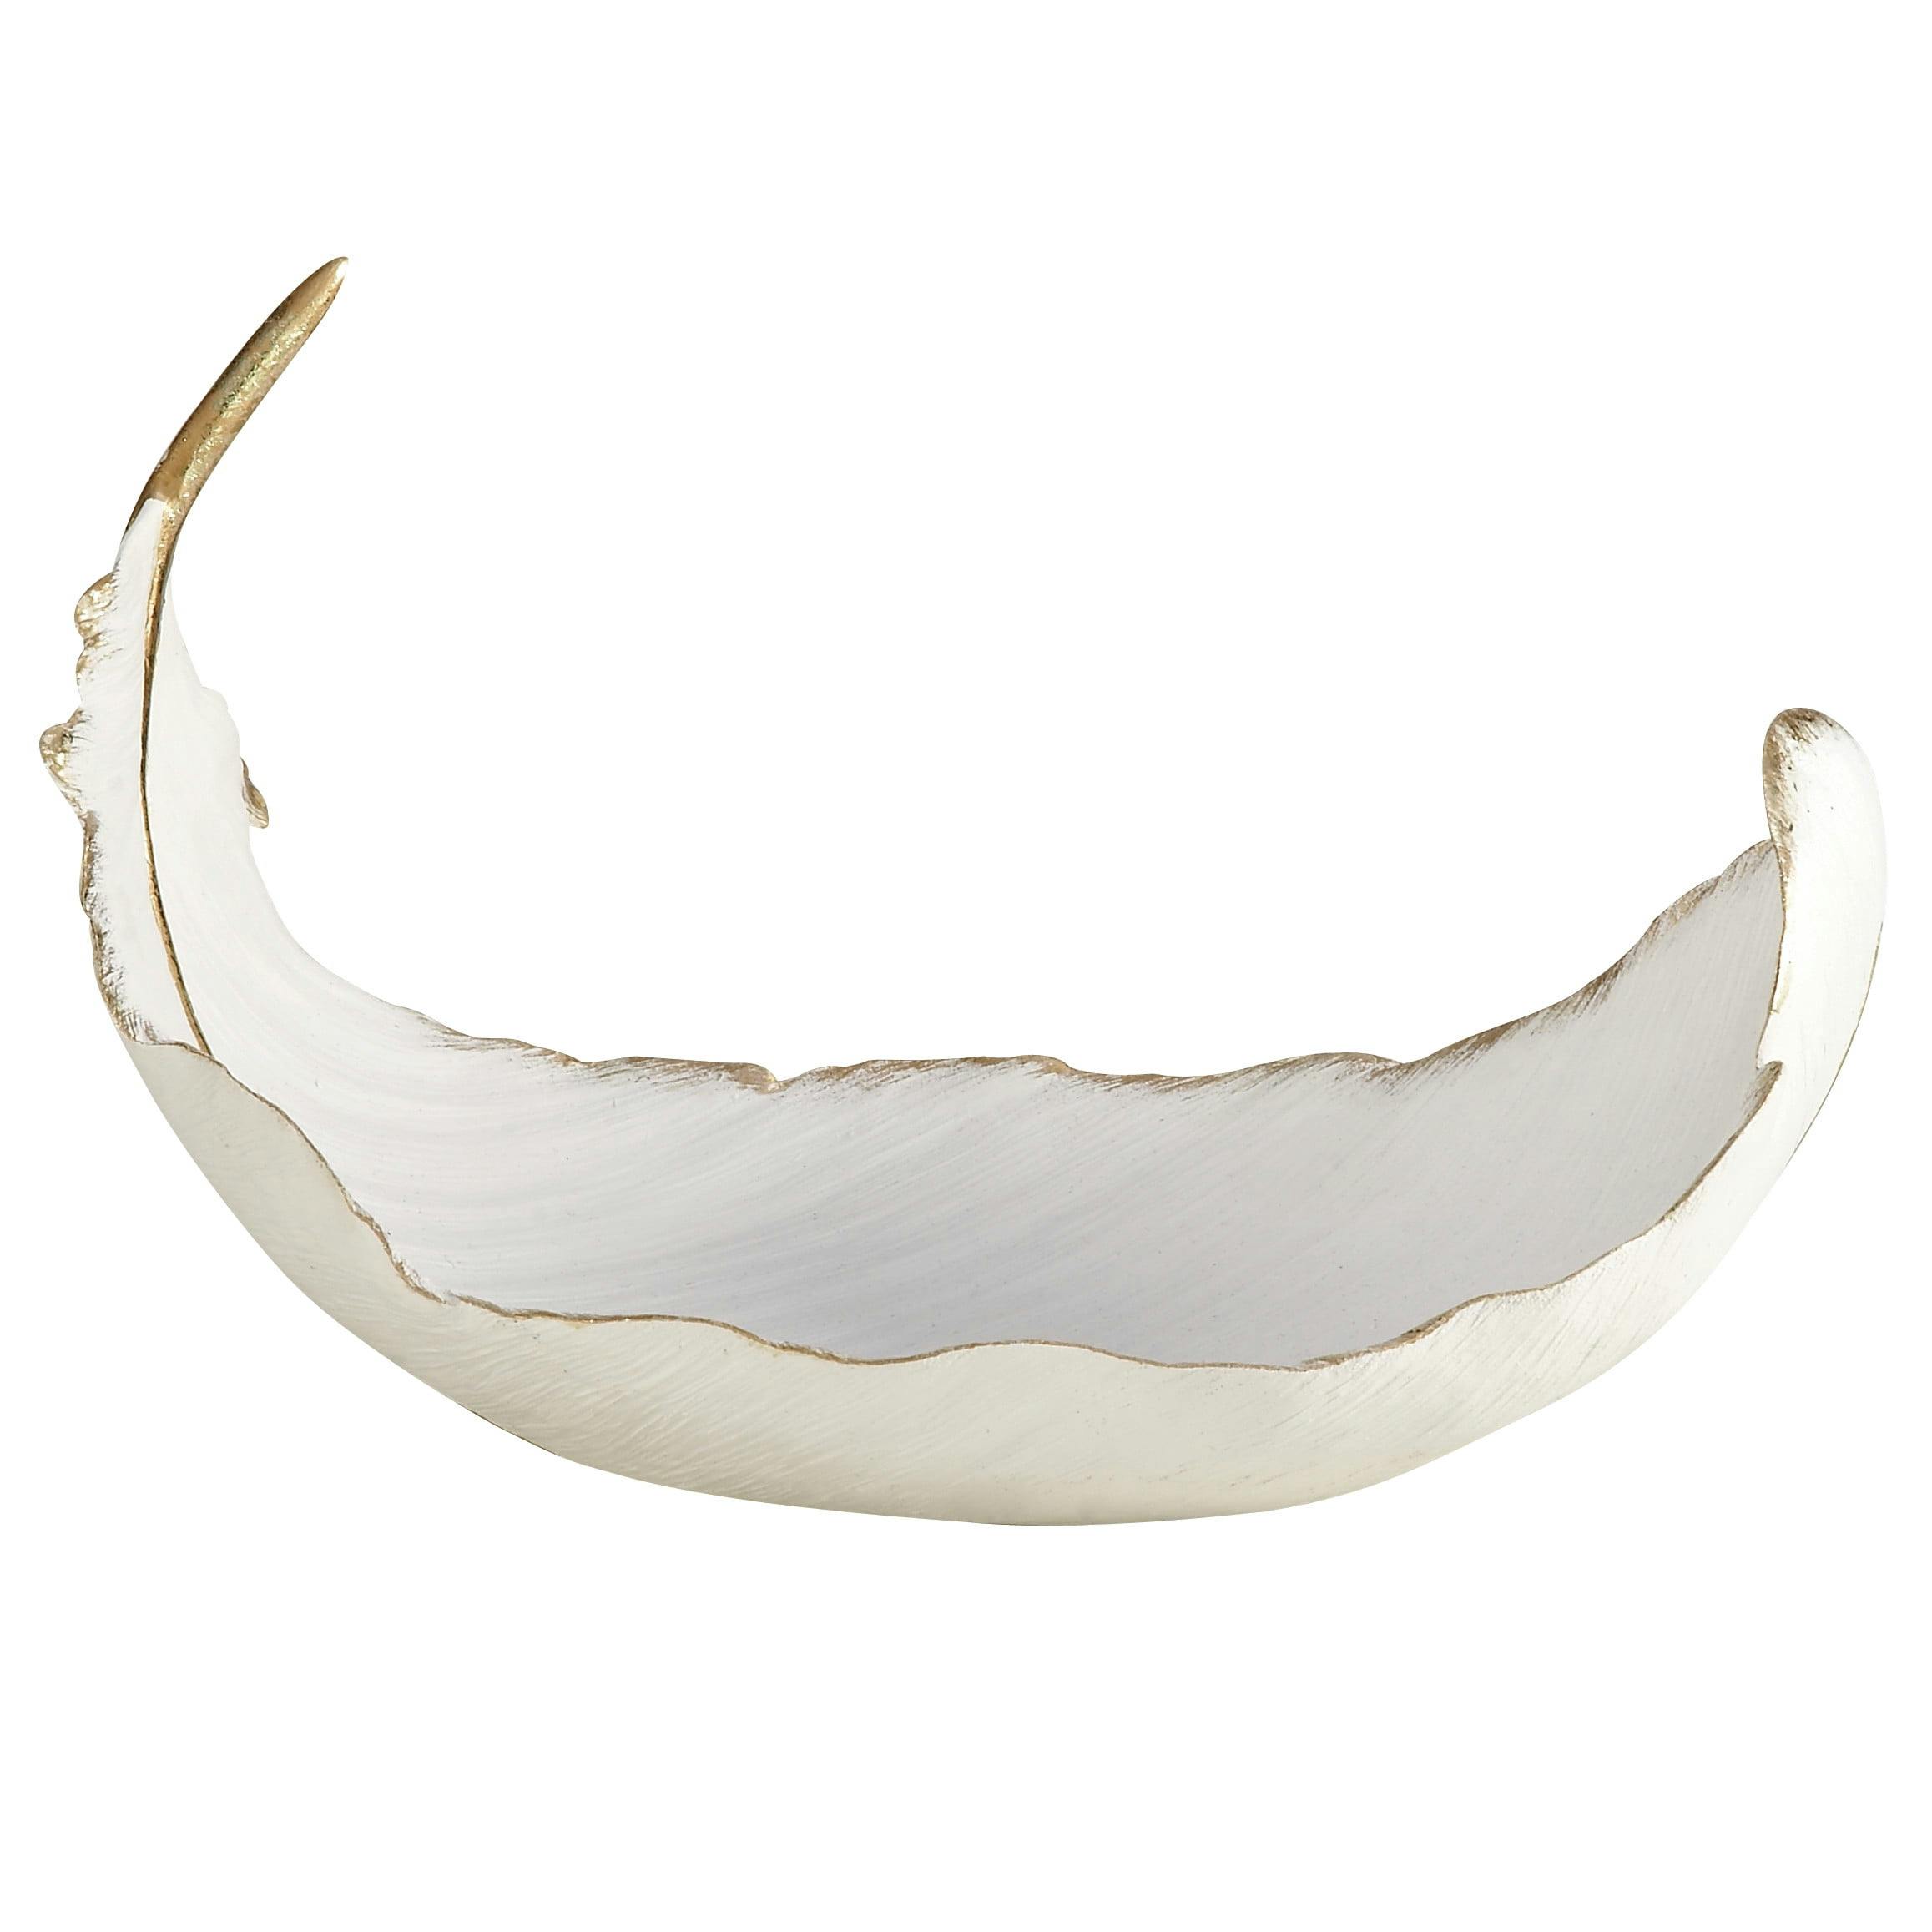 Elegant Oval White and Gold Polystone Feather Decorative Bowl